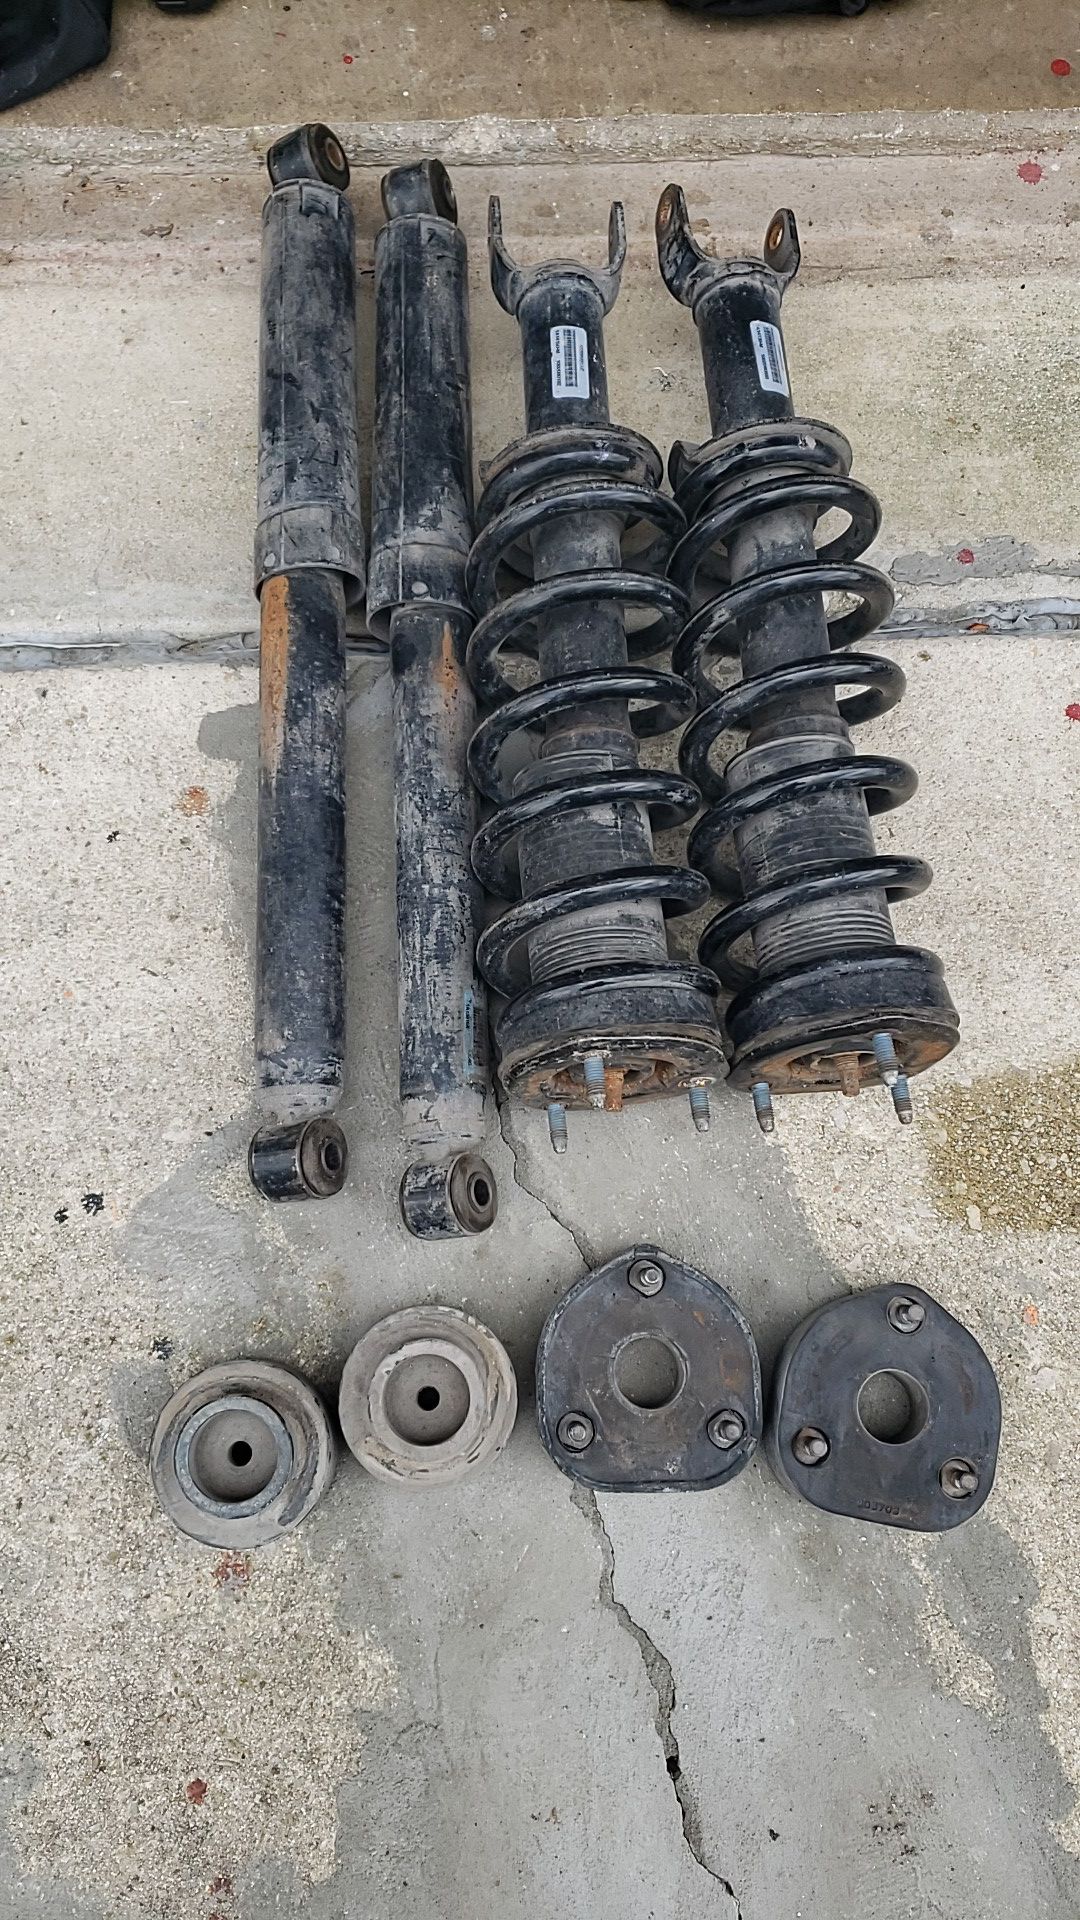 3rd Gen Ram 1500 front coil overs and rear shocks, OEM parts still good